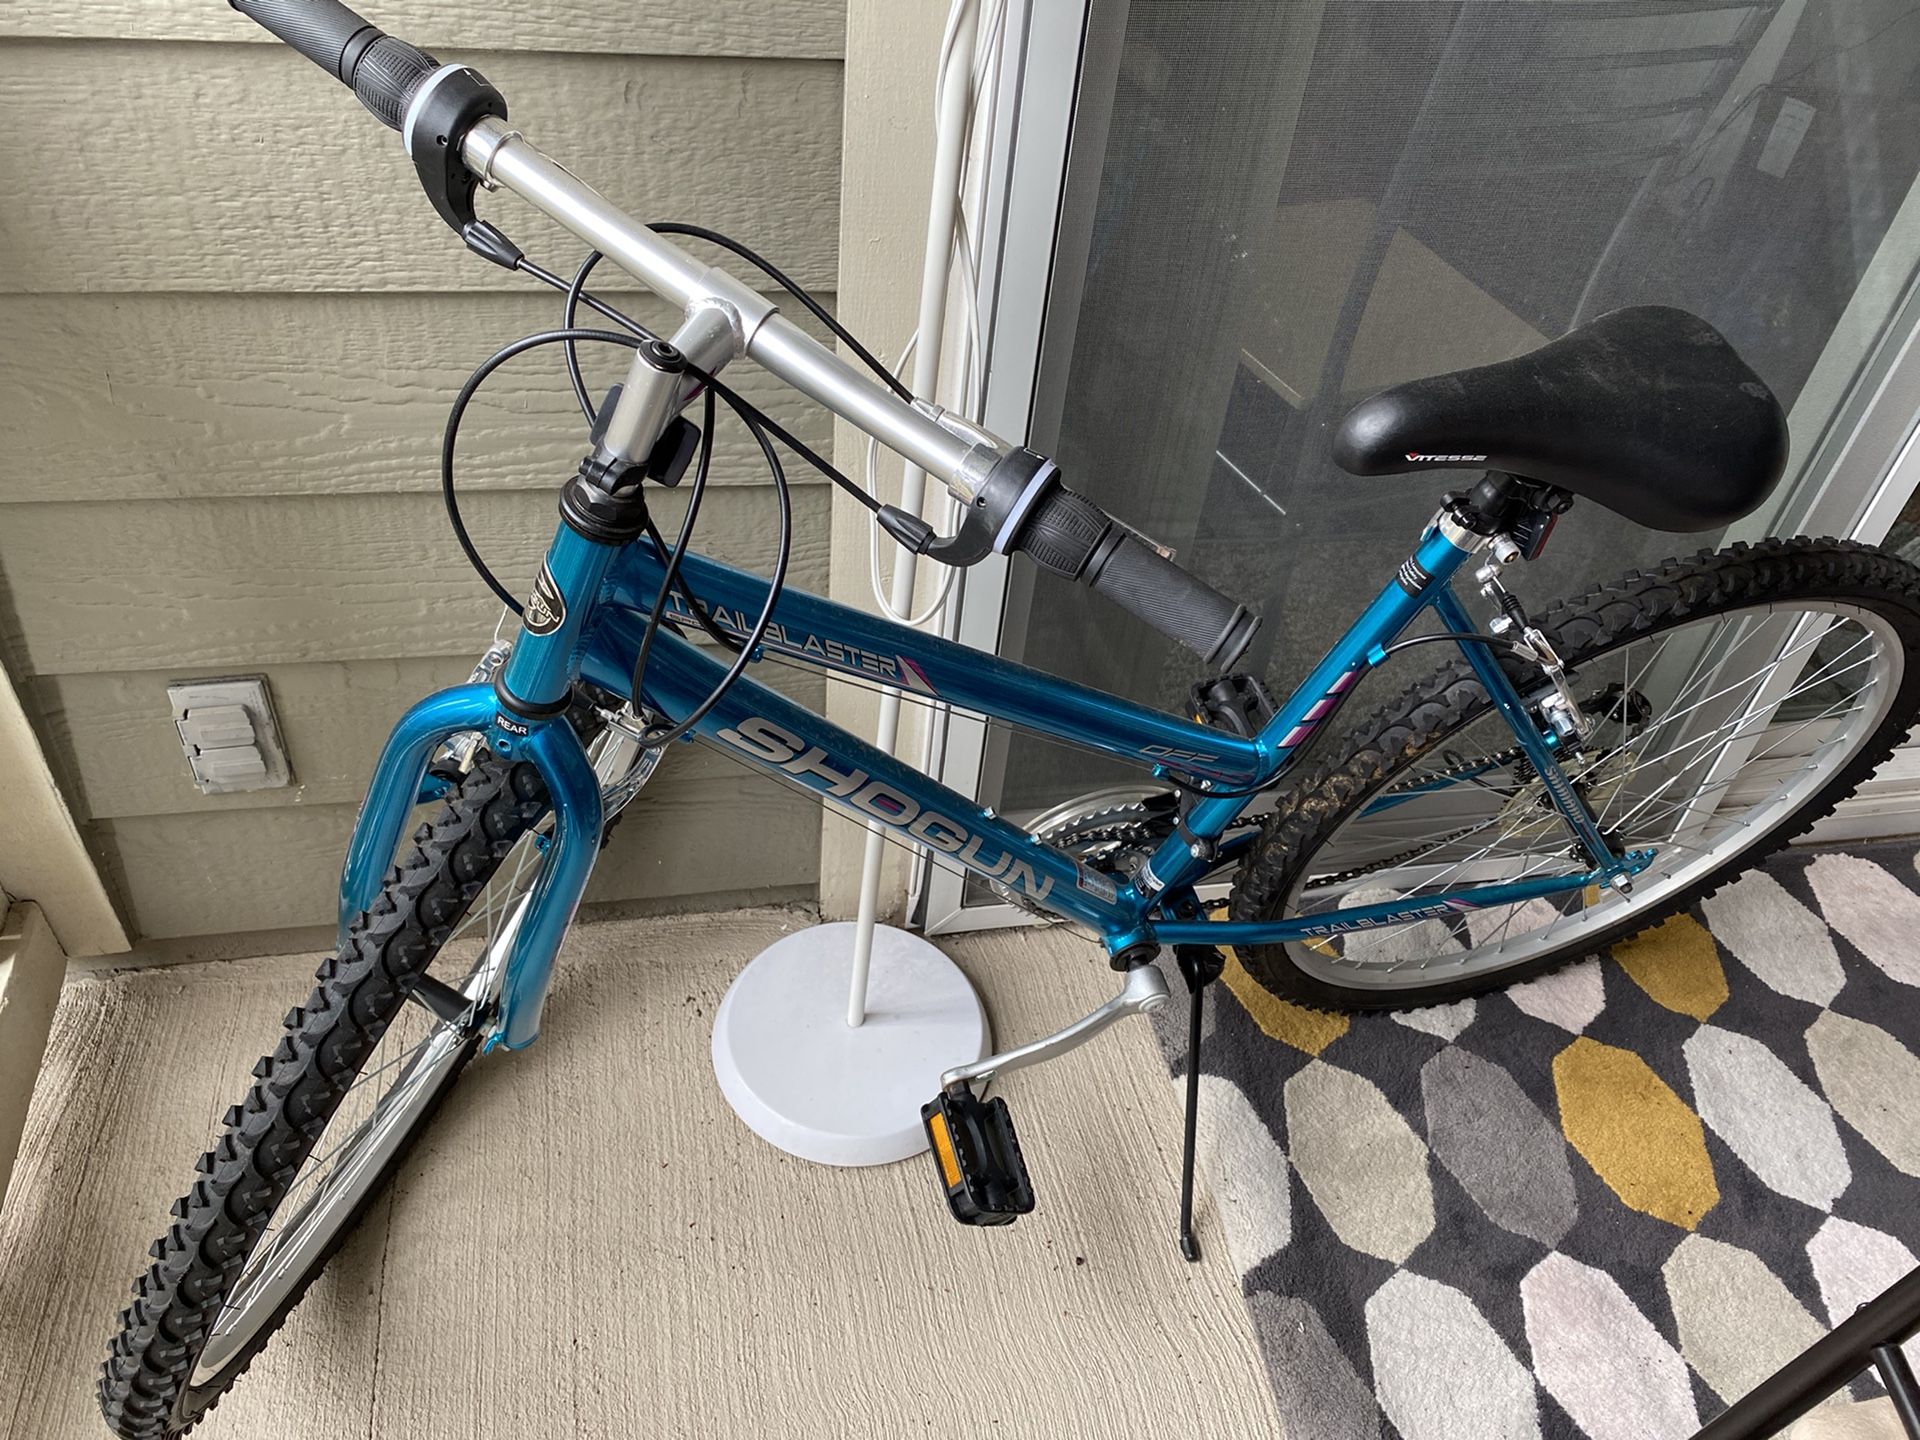 Bike-Plastic needs to be replaced but everything else works